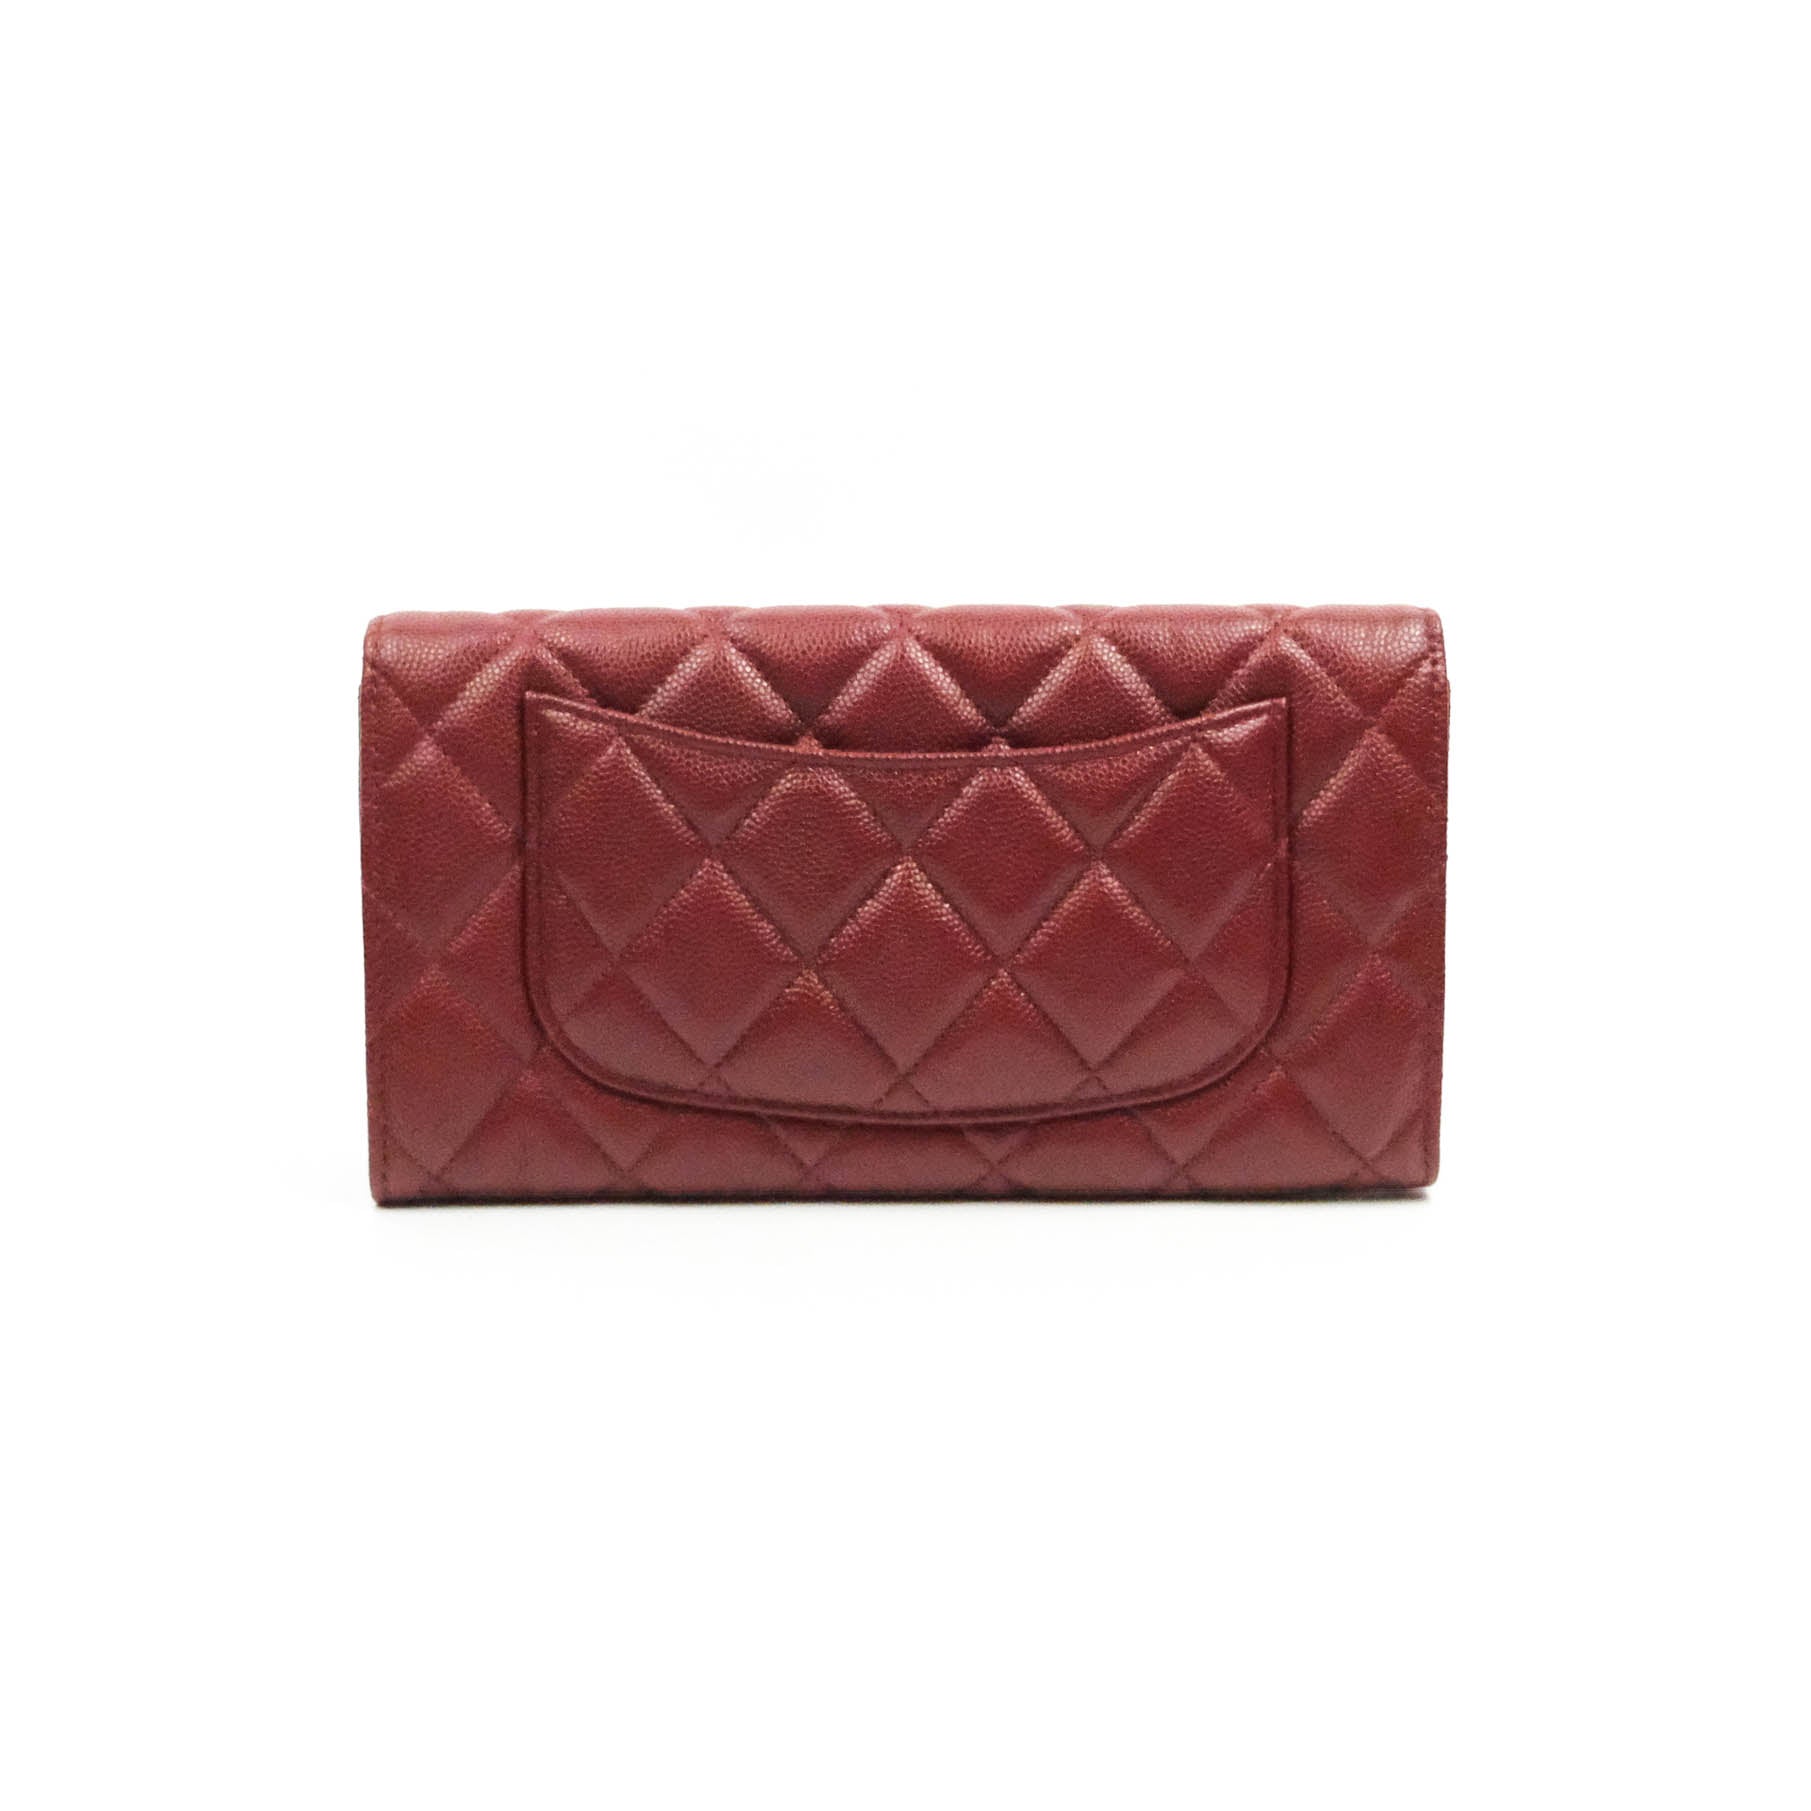 Chanel - Classic Grained Leather Flap Wallet with Golden Hardware